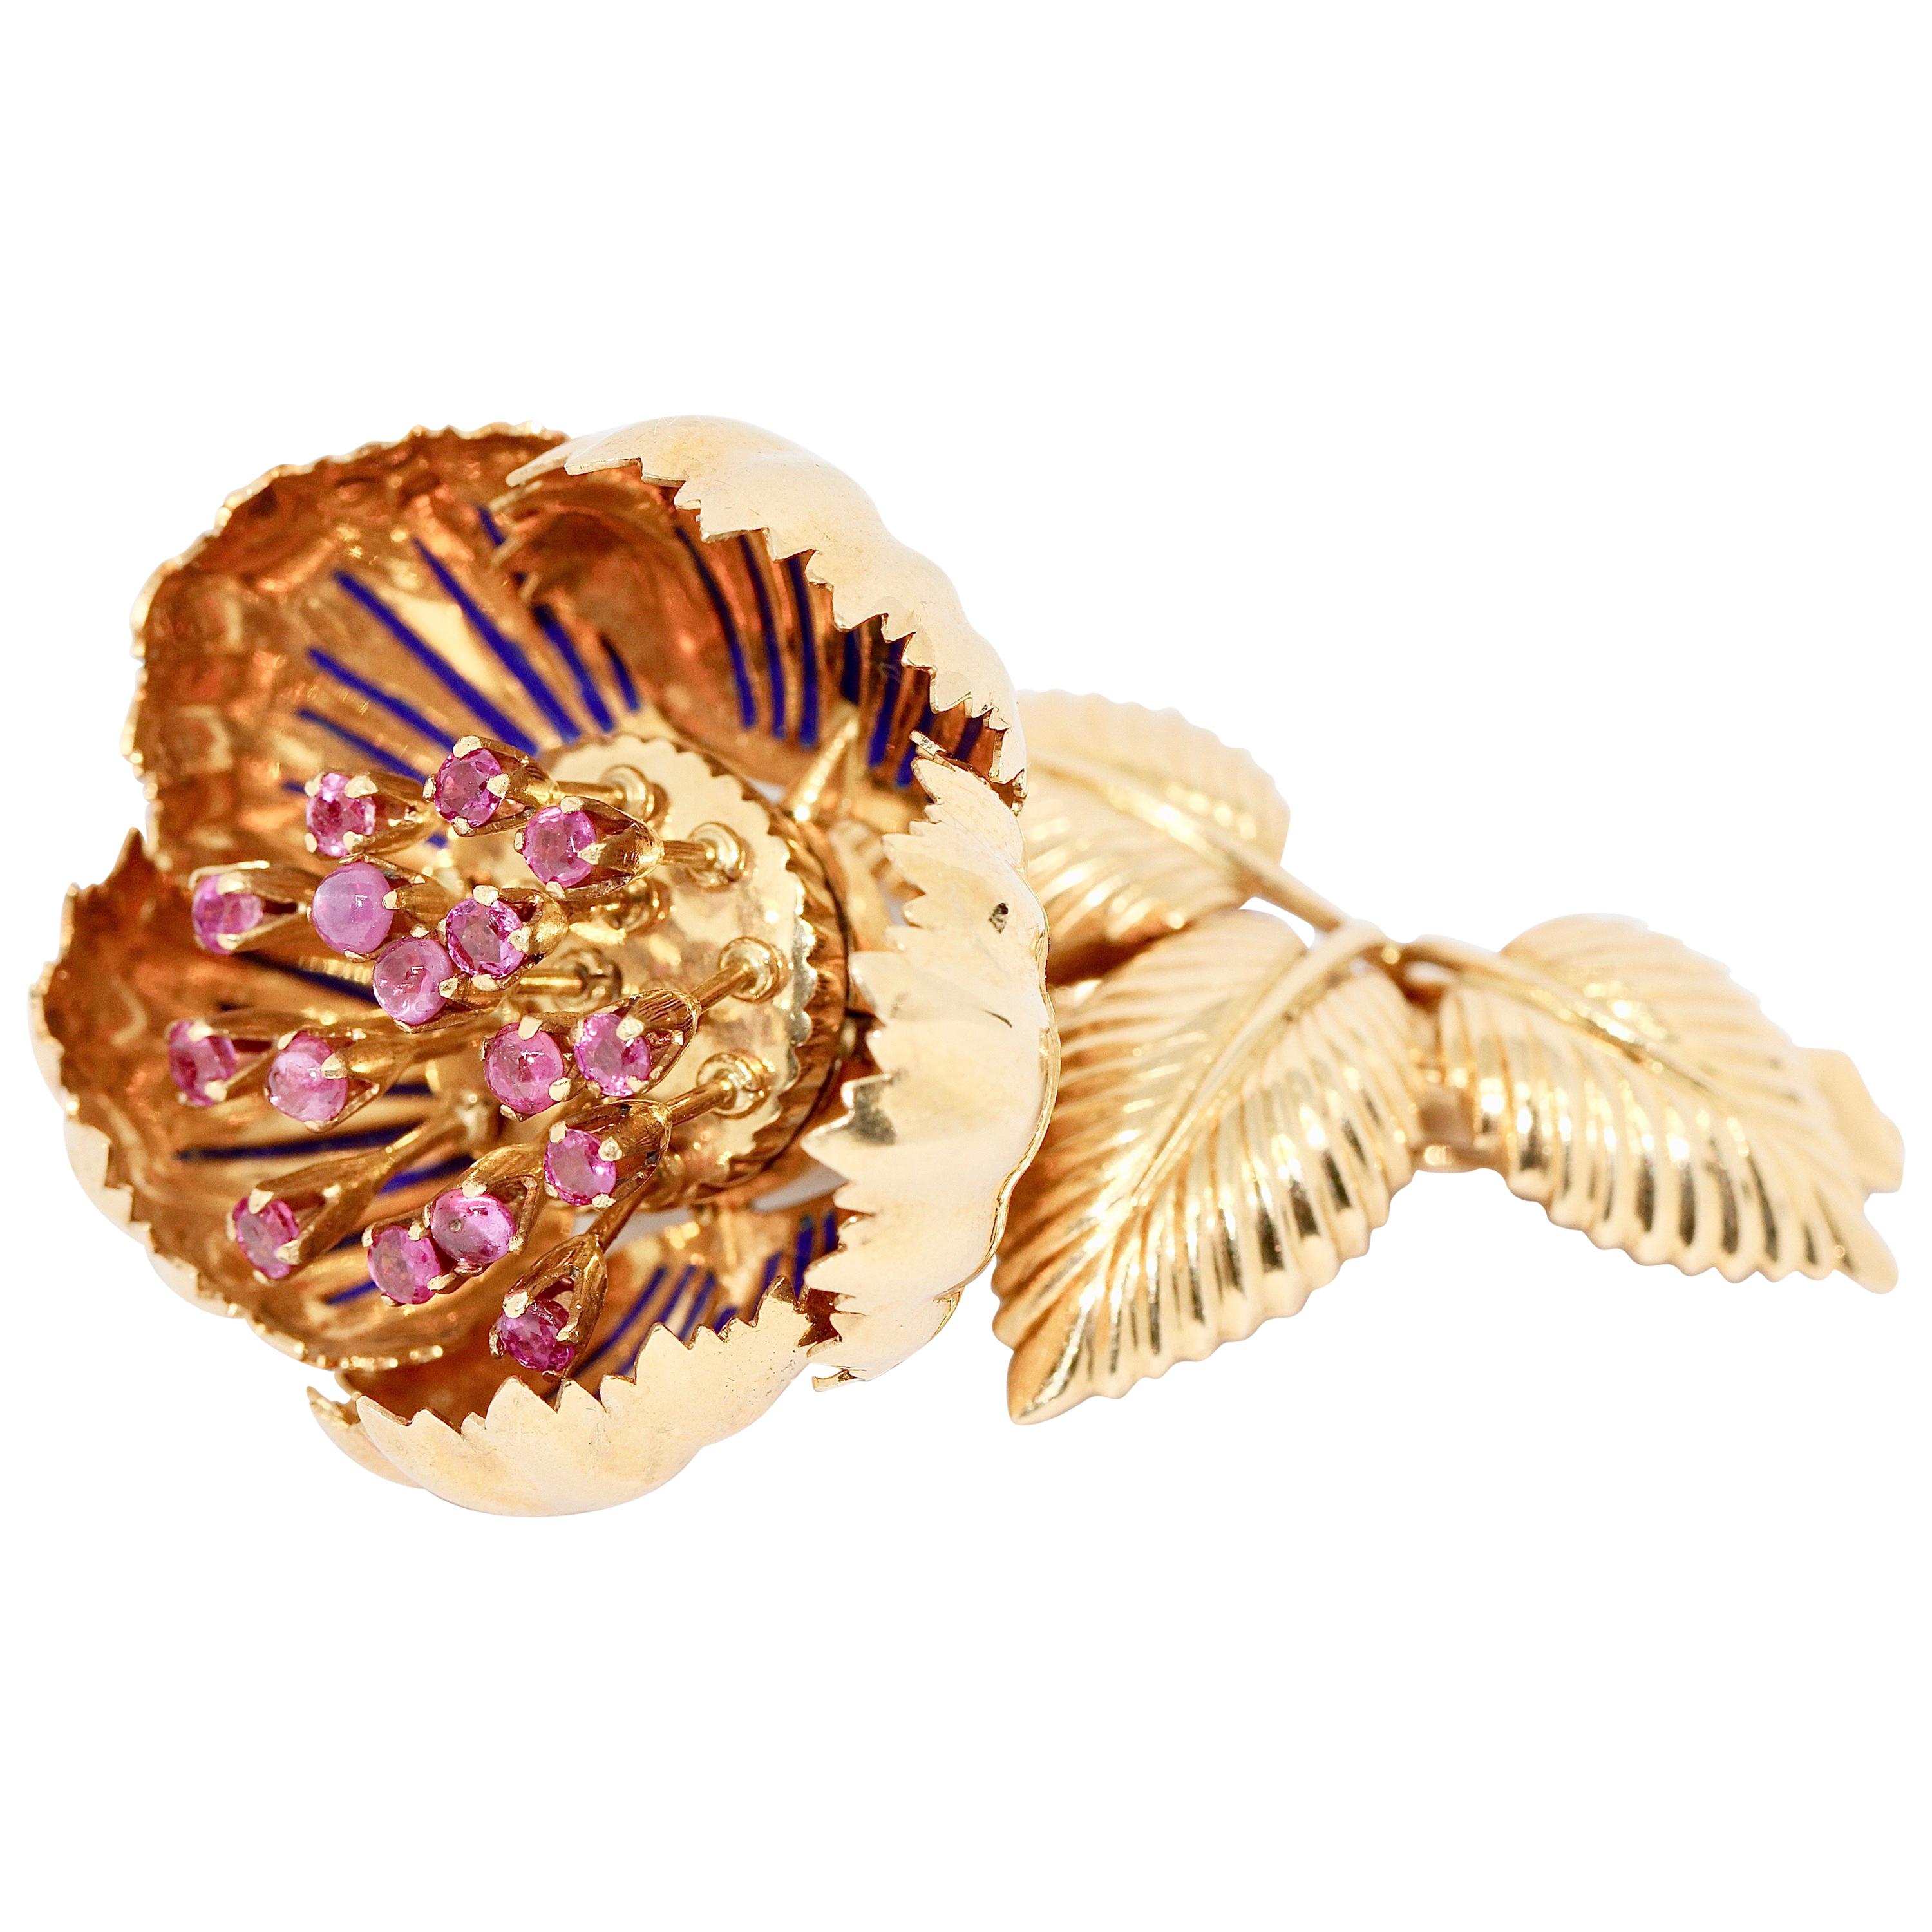 Enchanting, 18 Karat Floral Gold Brooch with Movable Petals, Rubies and Enamel